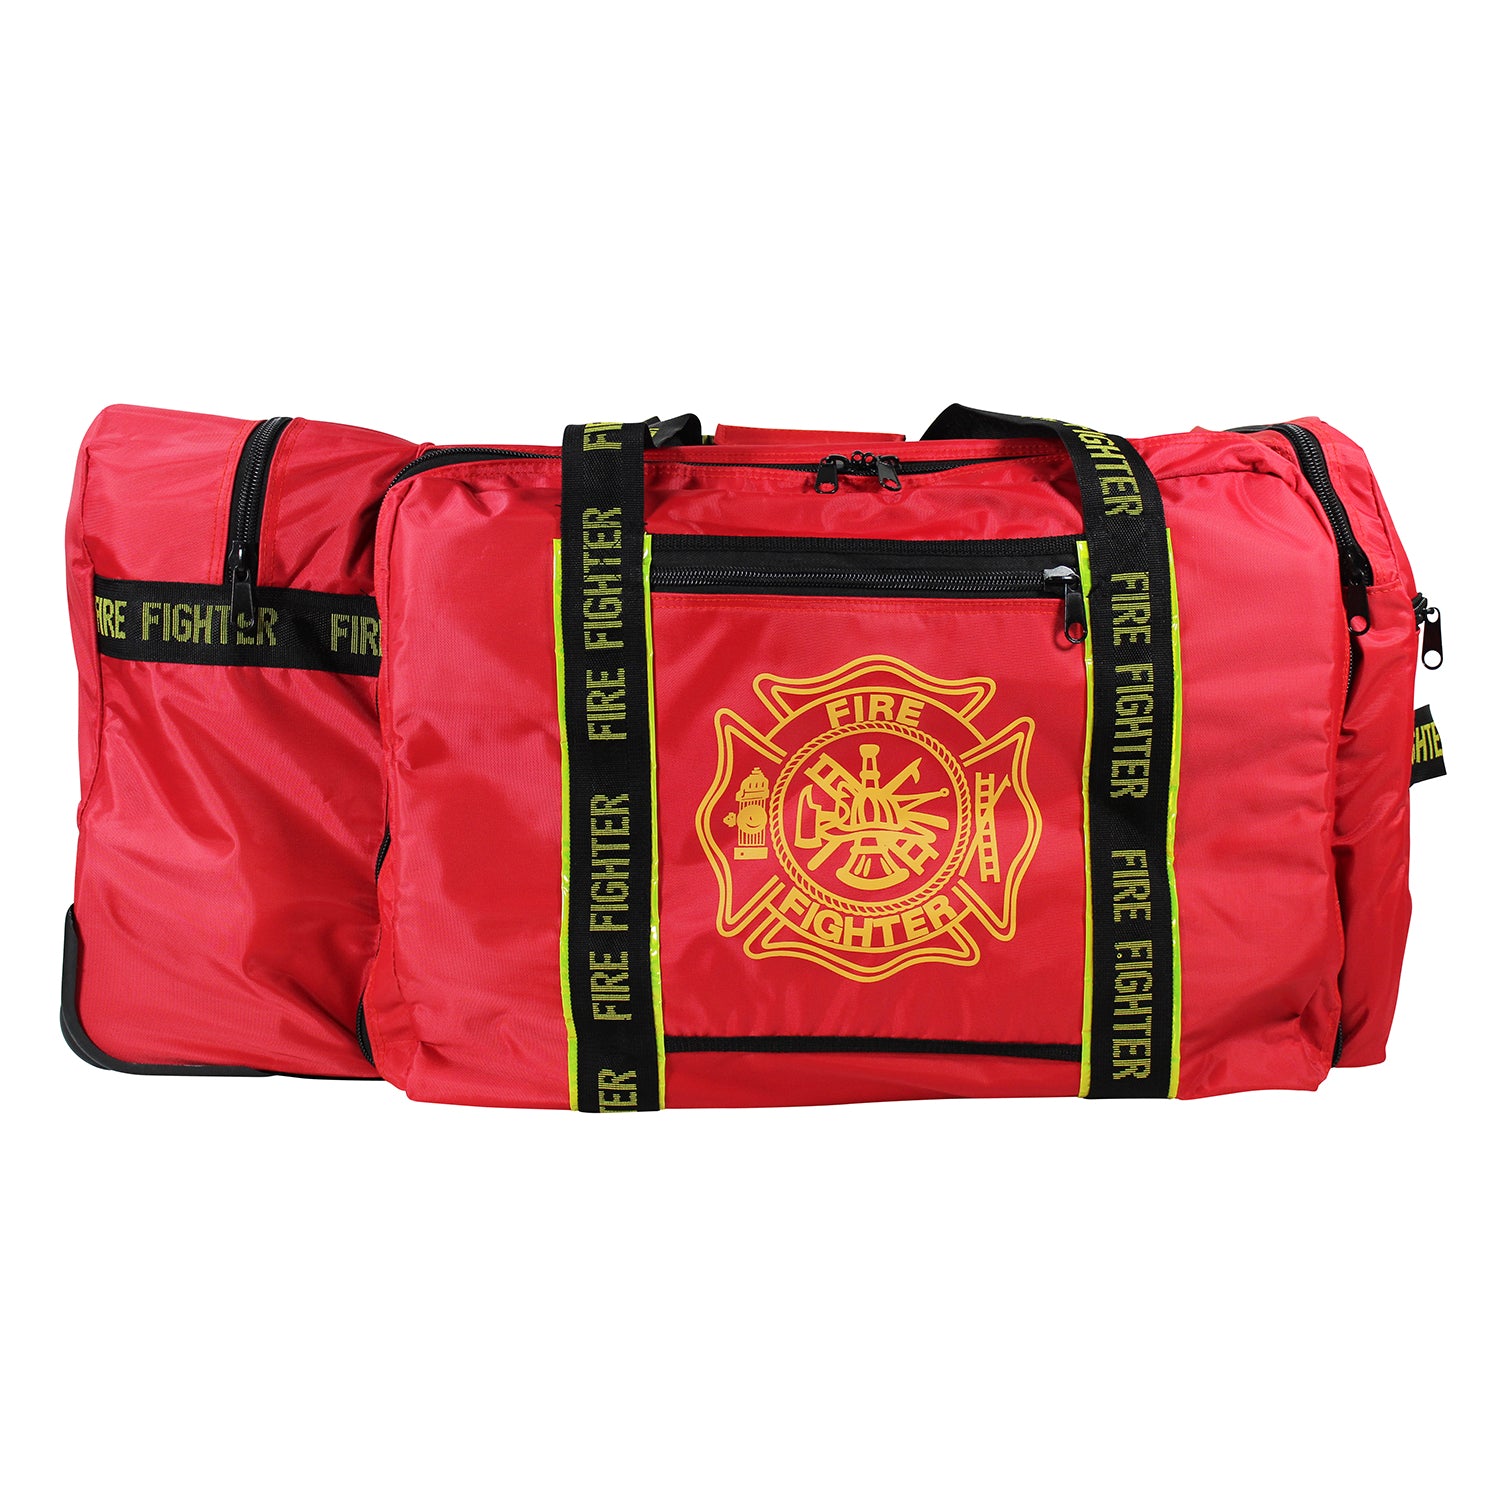 Fire fighter Gear Bag Australia - Your Source for Quality Gear Bags